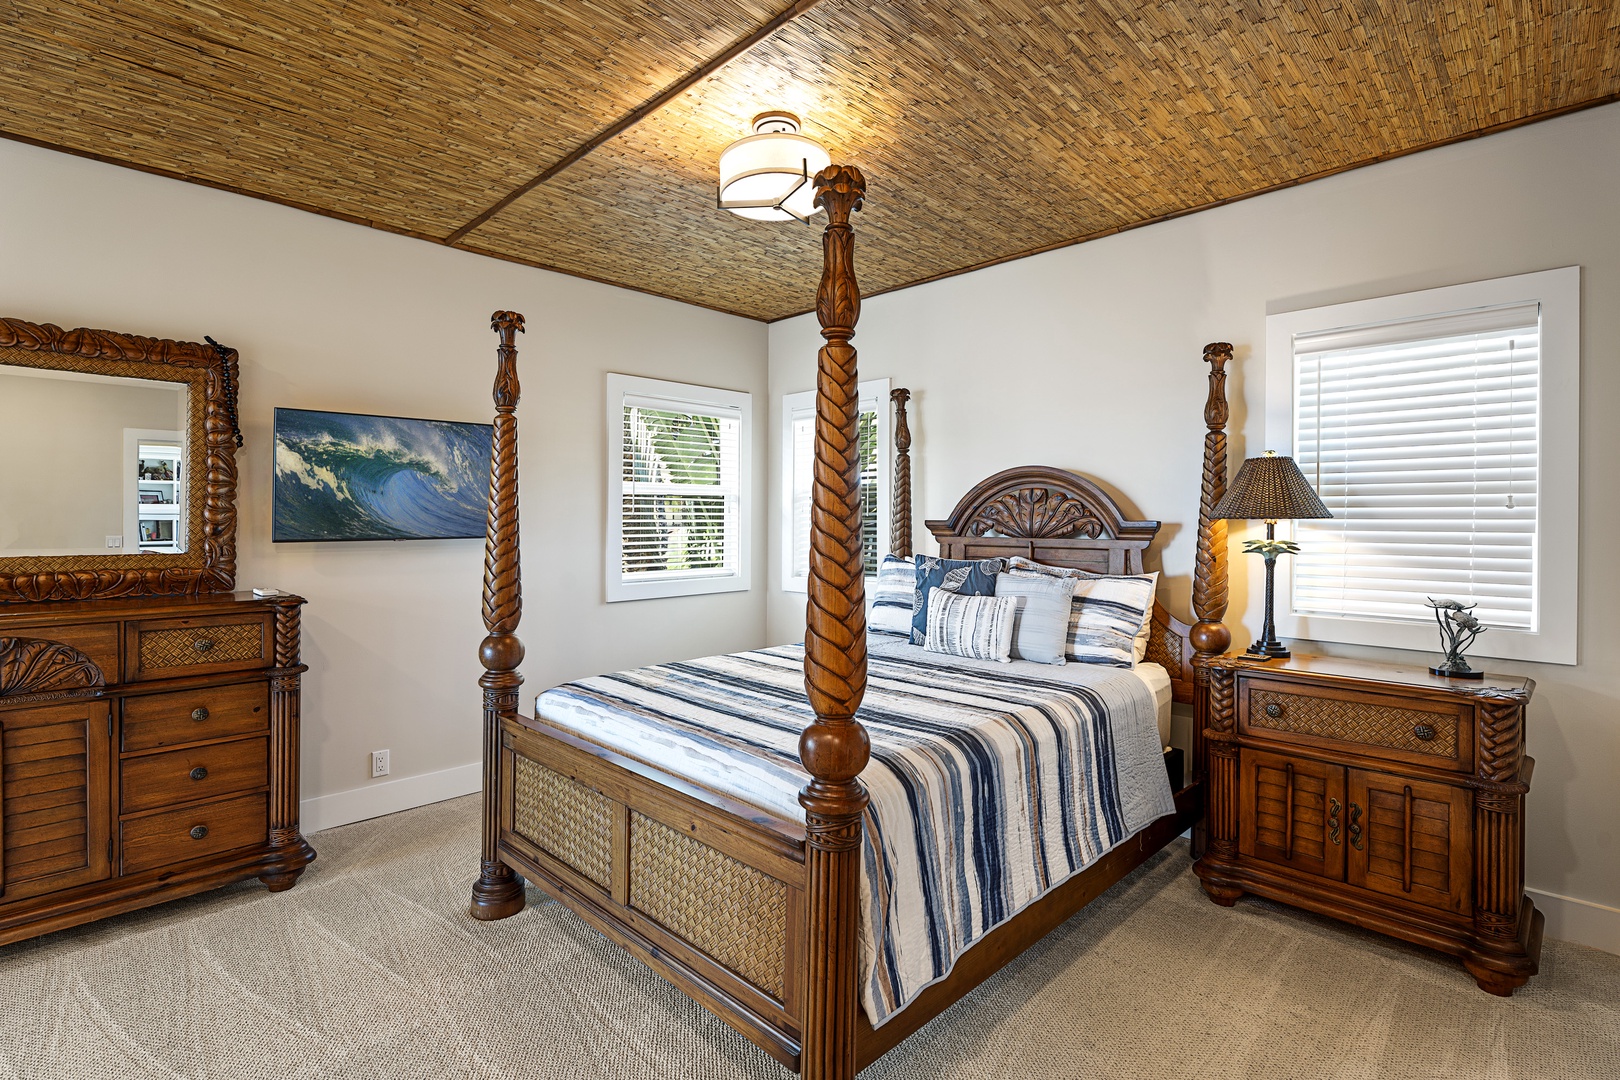 Kailua Kona Vacation Rentals, Ali'i Point #7 - Guest Bedroom with queen bed